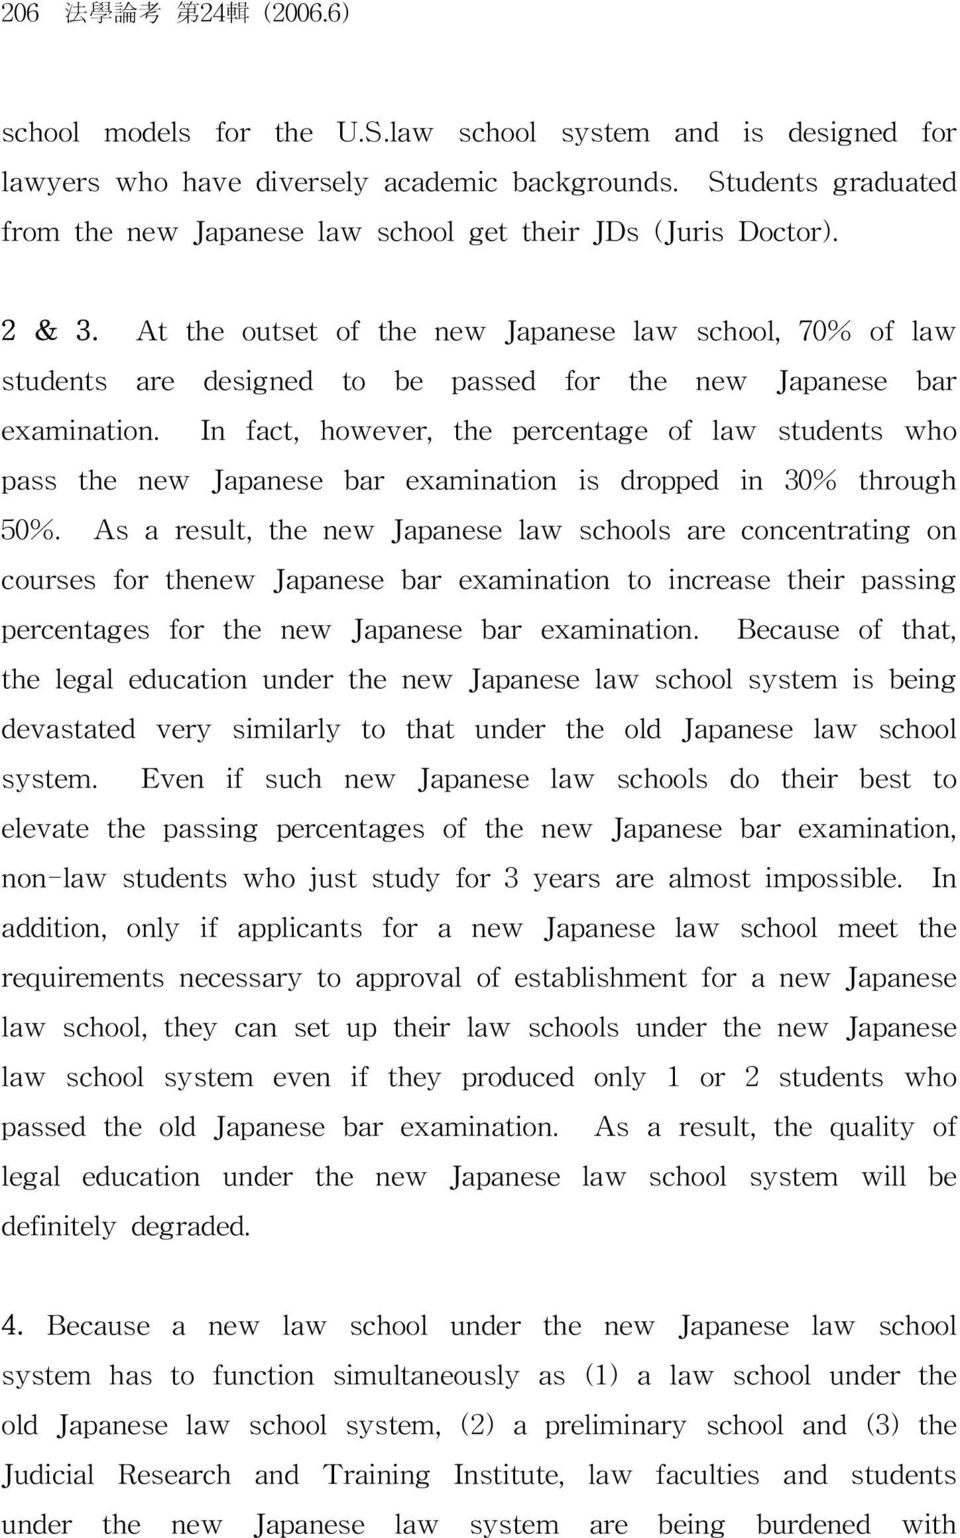 At the outset of the new Japanese law school, 70% of law students are designed to be passed for the new Japanese bar examination.